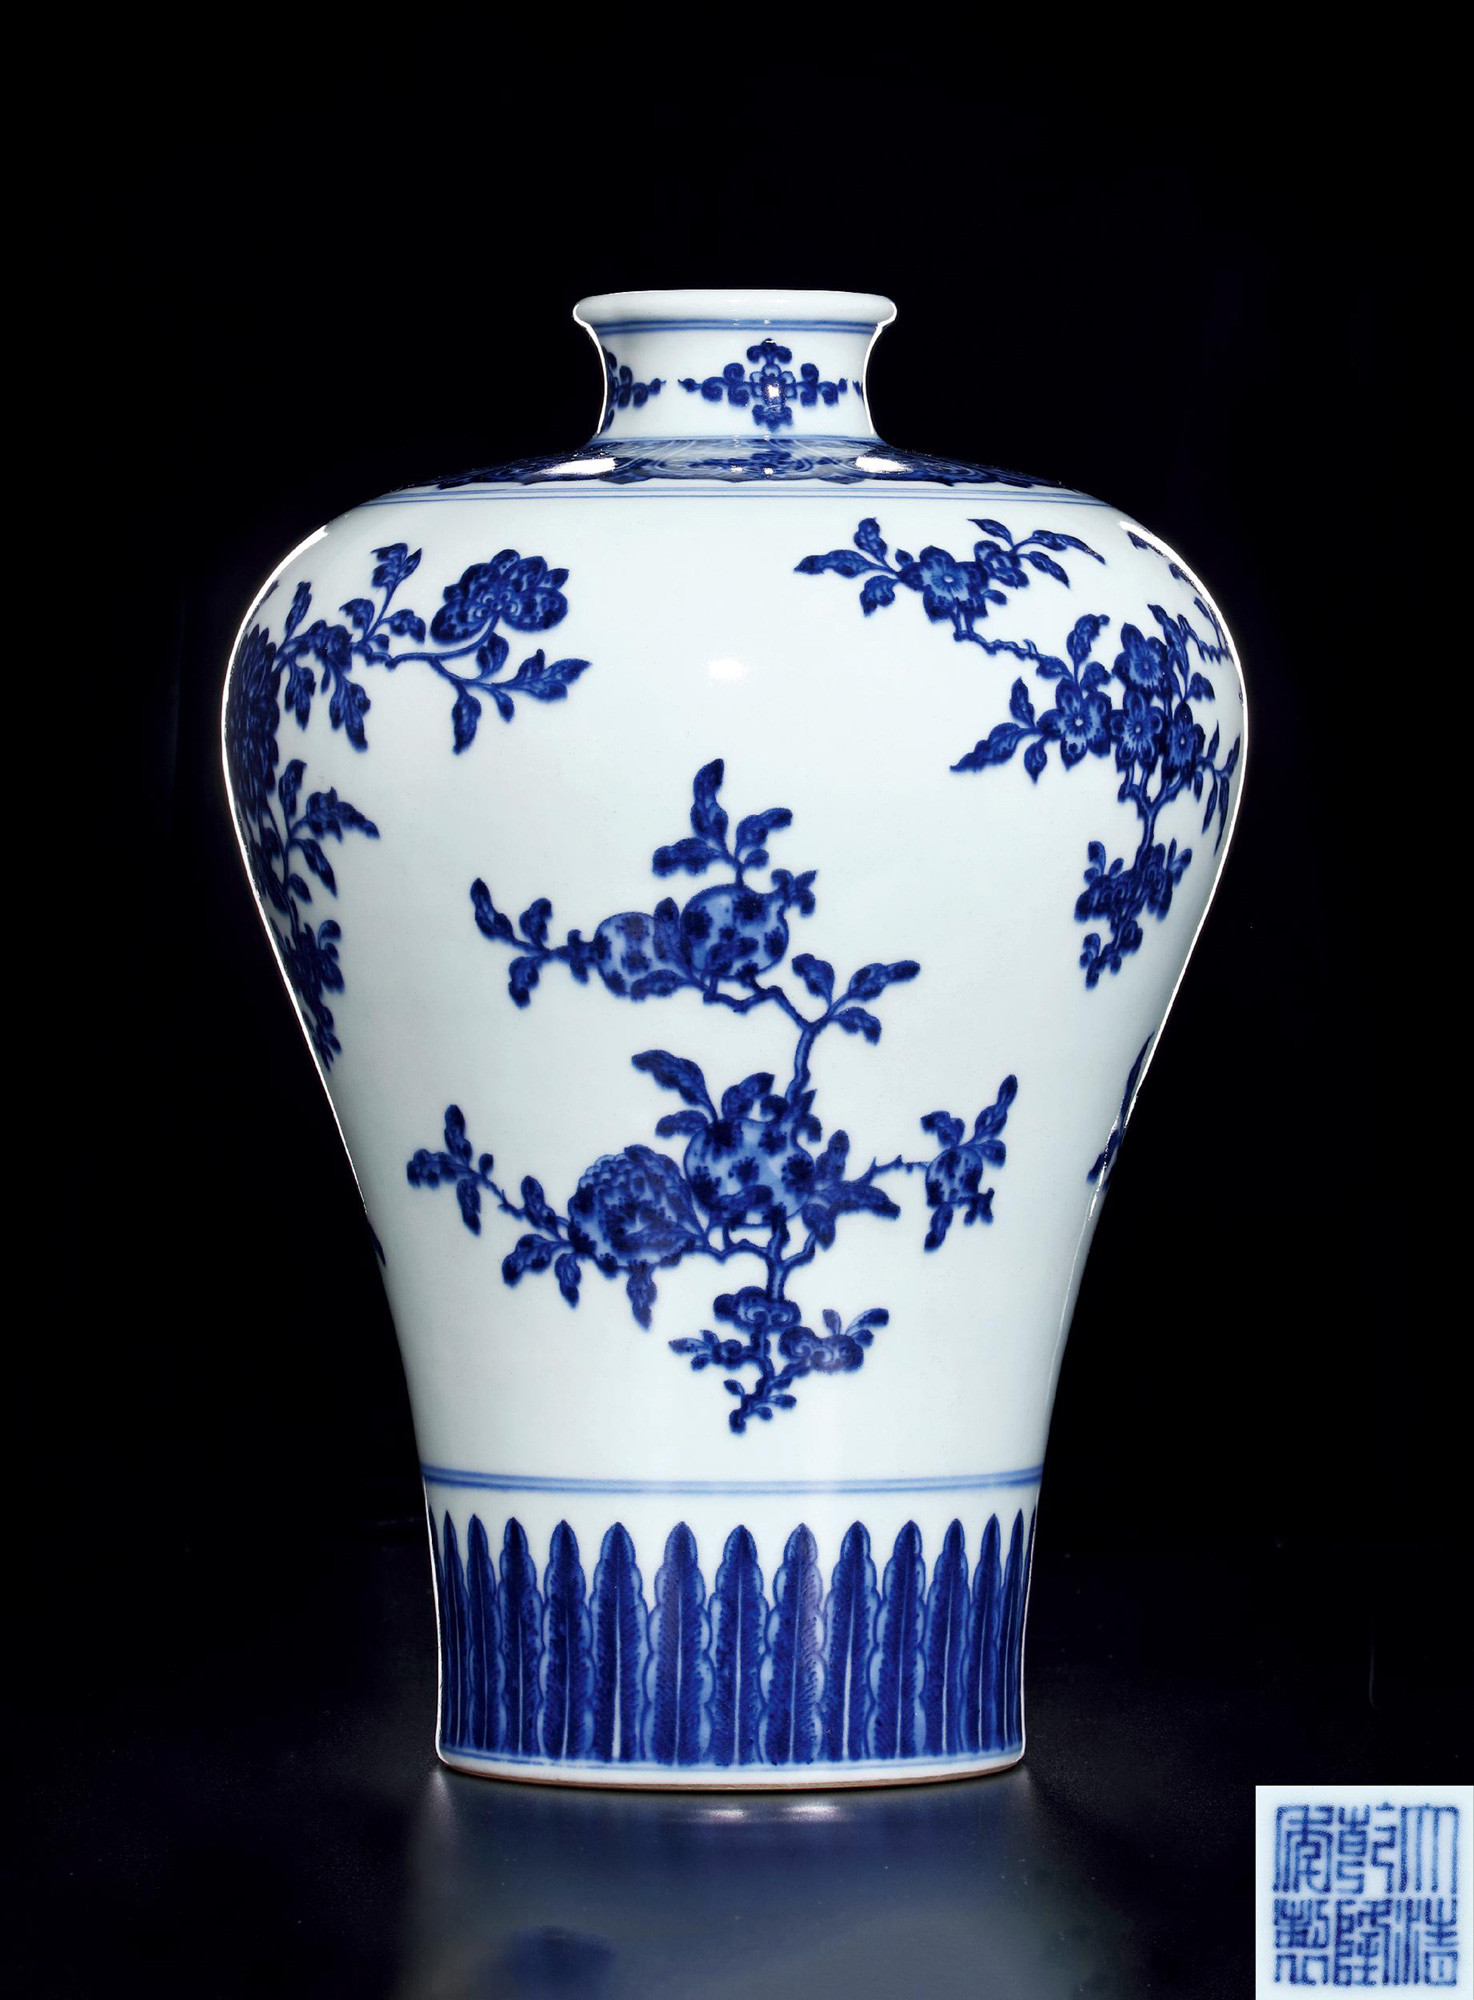 AN EXTREMELY RARE BLUE AND WHITE“FLORAL AND FURIT”MEIPING VASE